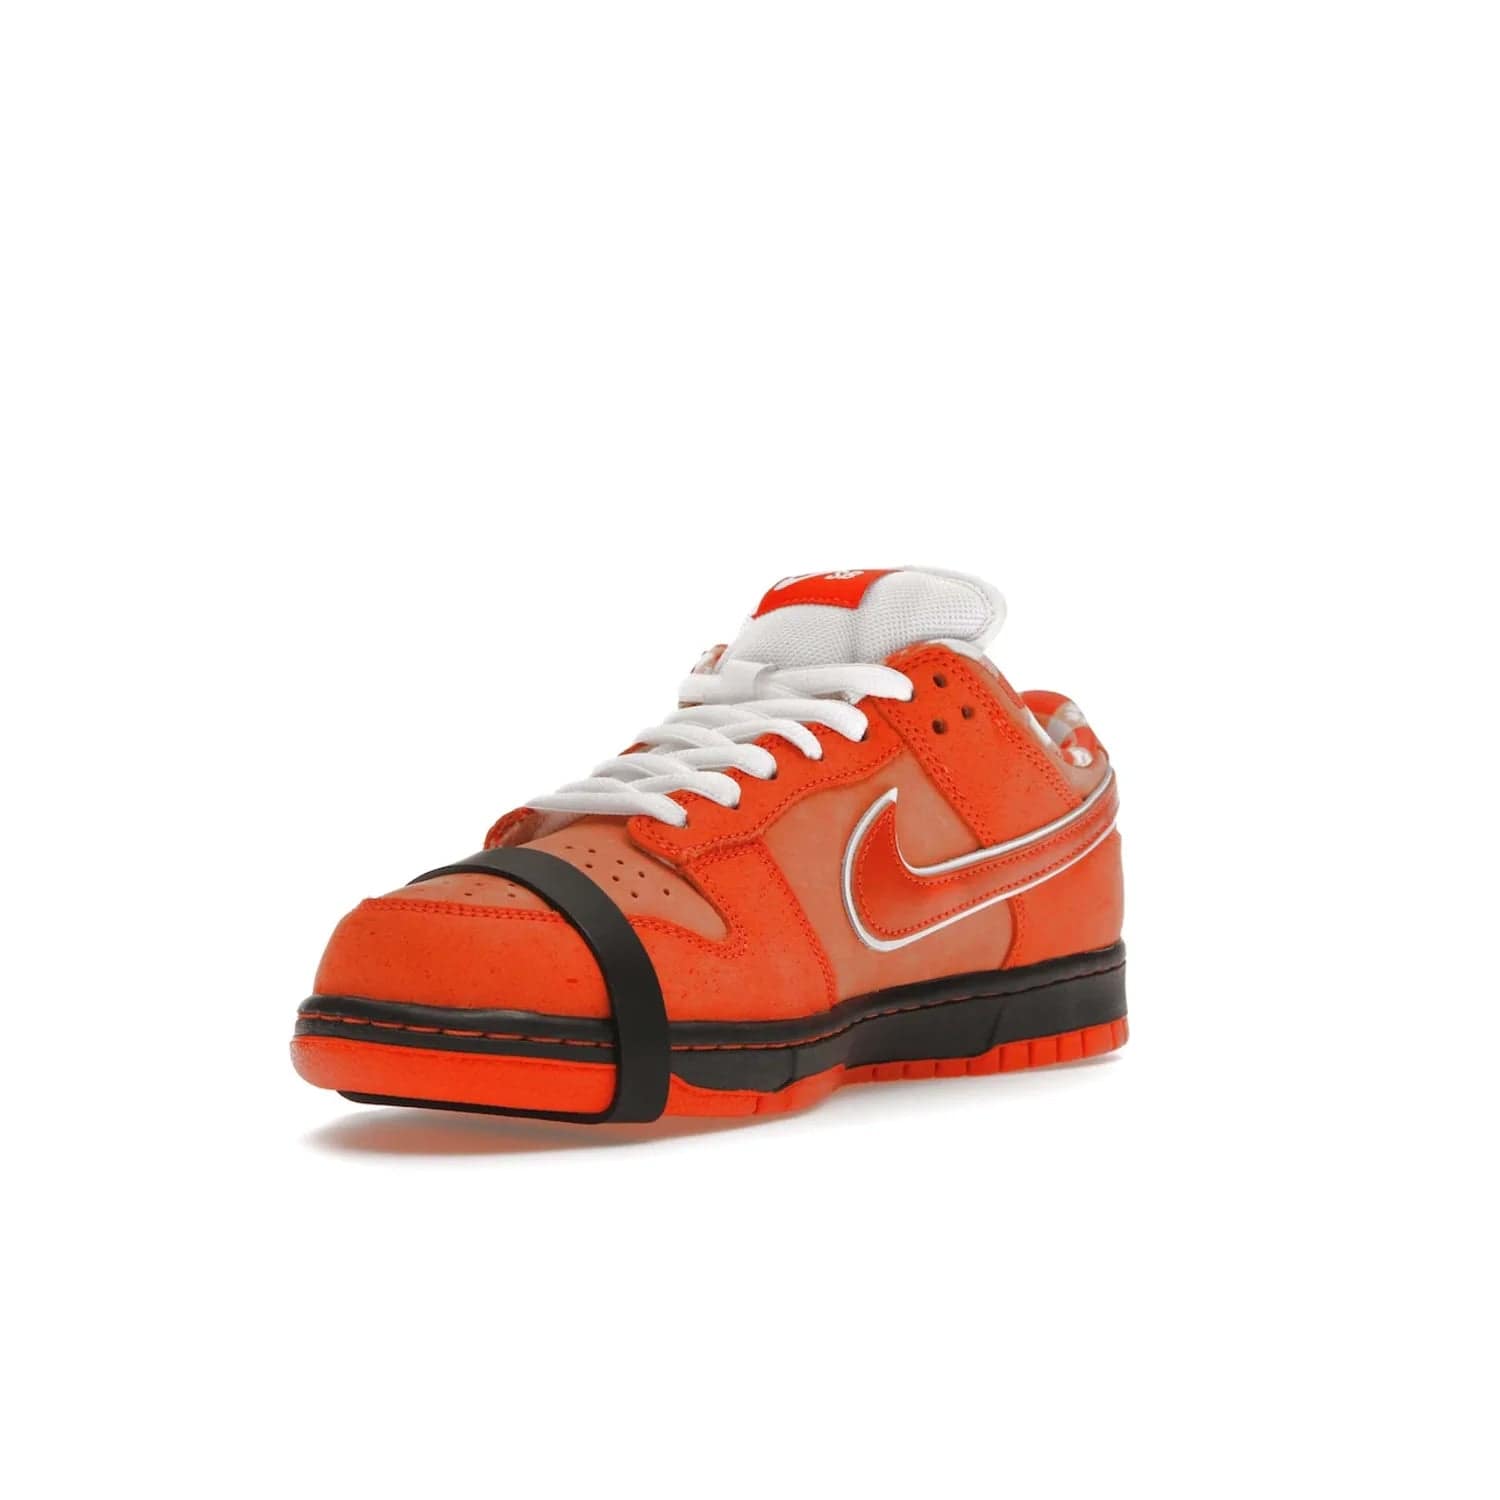 Nike SB Dunk Low Concepts Orange Lobster - Image 14 - Only at www.BallersClubKickz.com - Limited Nike SB Dunk Low Concepts Orange Lobster features premium nubuck upper with vibrant oranges for eye-catching colorblocked design. Signature Nike SB tag and bib-inspired interior for added texture. Outsole and cupsole provide extra reinforcement. Get it 12/20/2022.